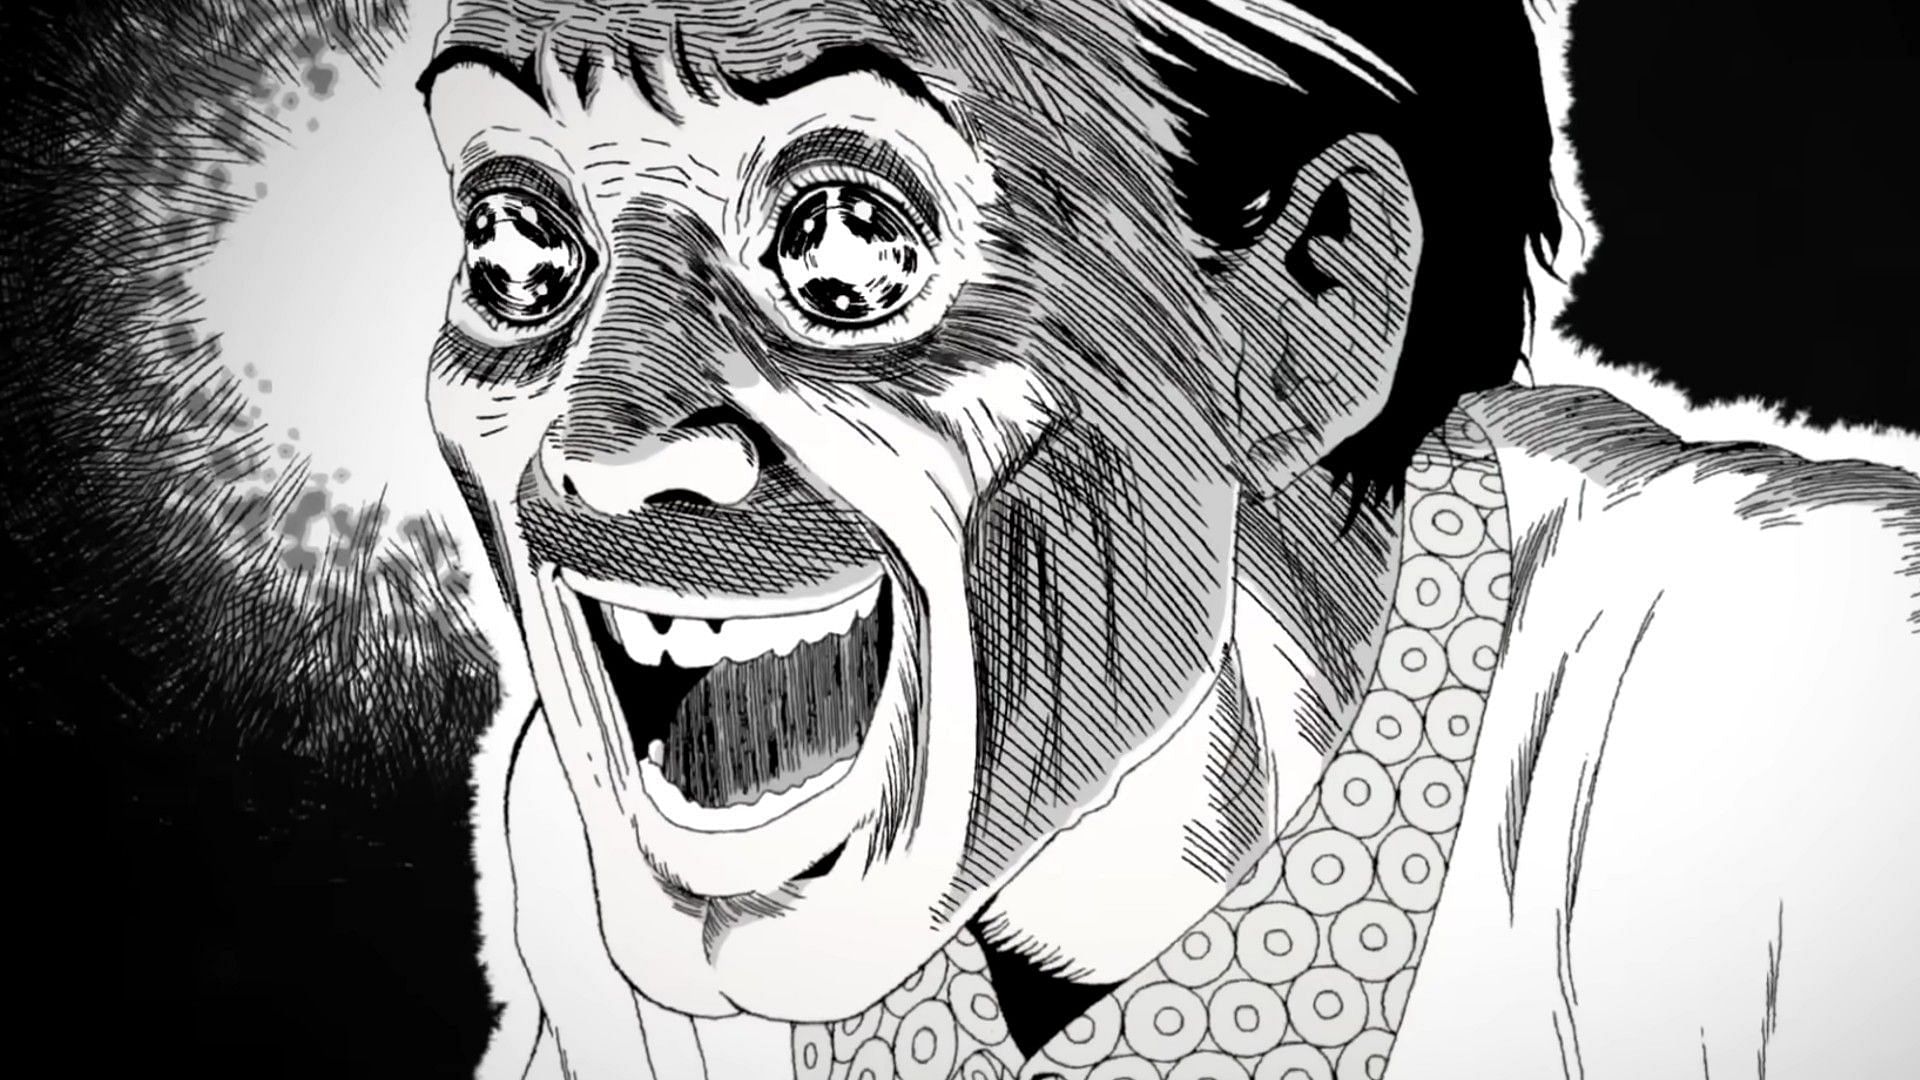 Out of any panel that Junji Ito has drawn this is the most